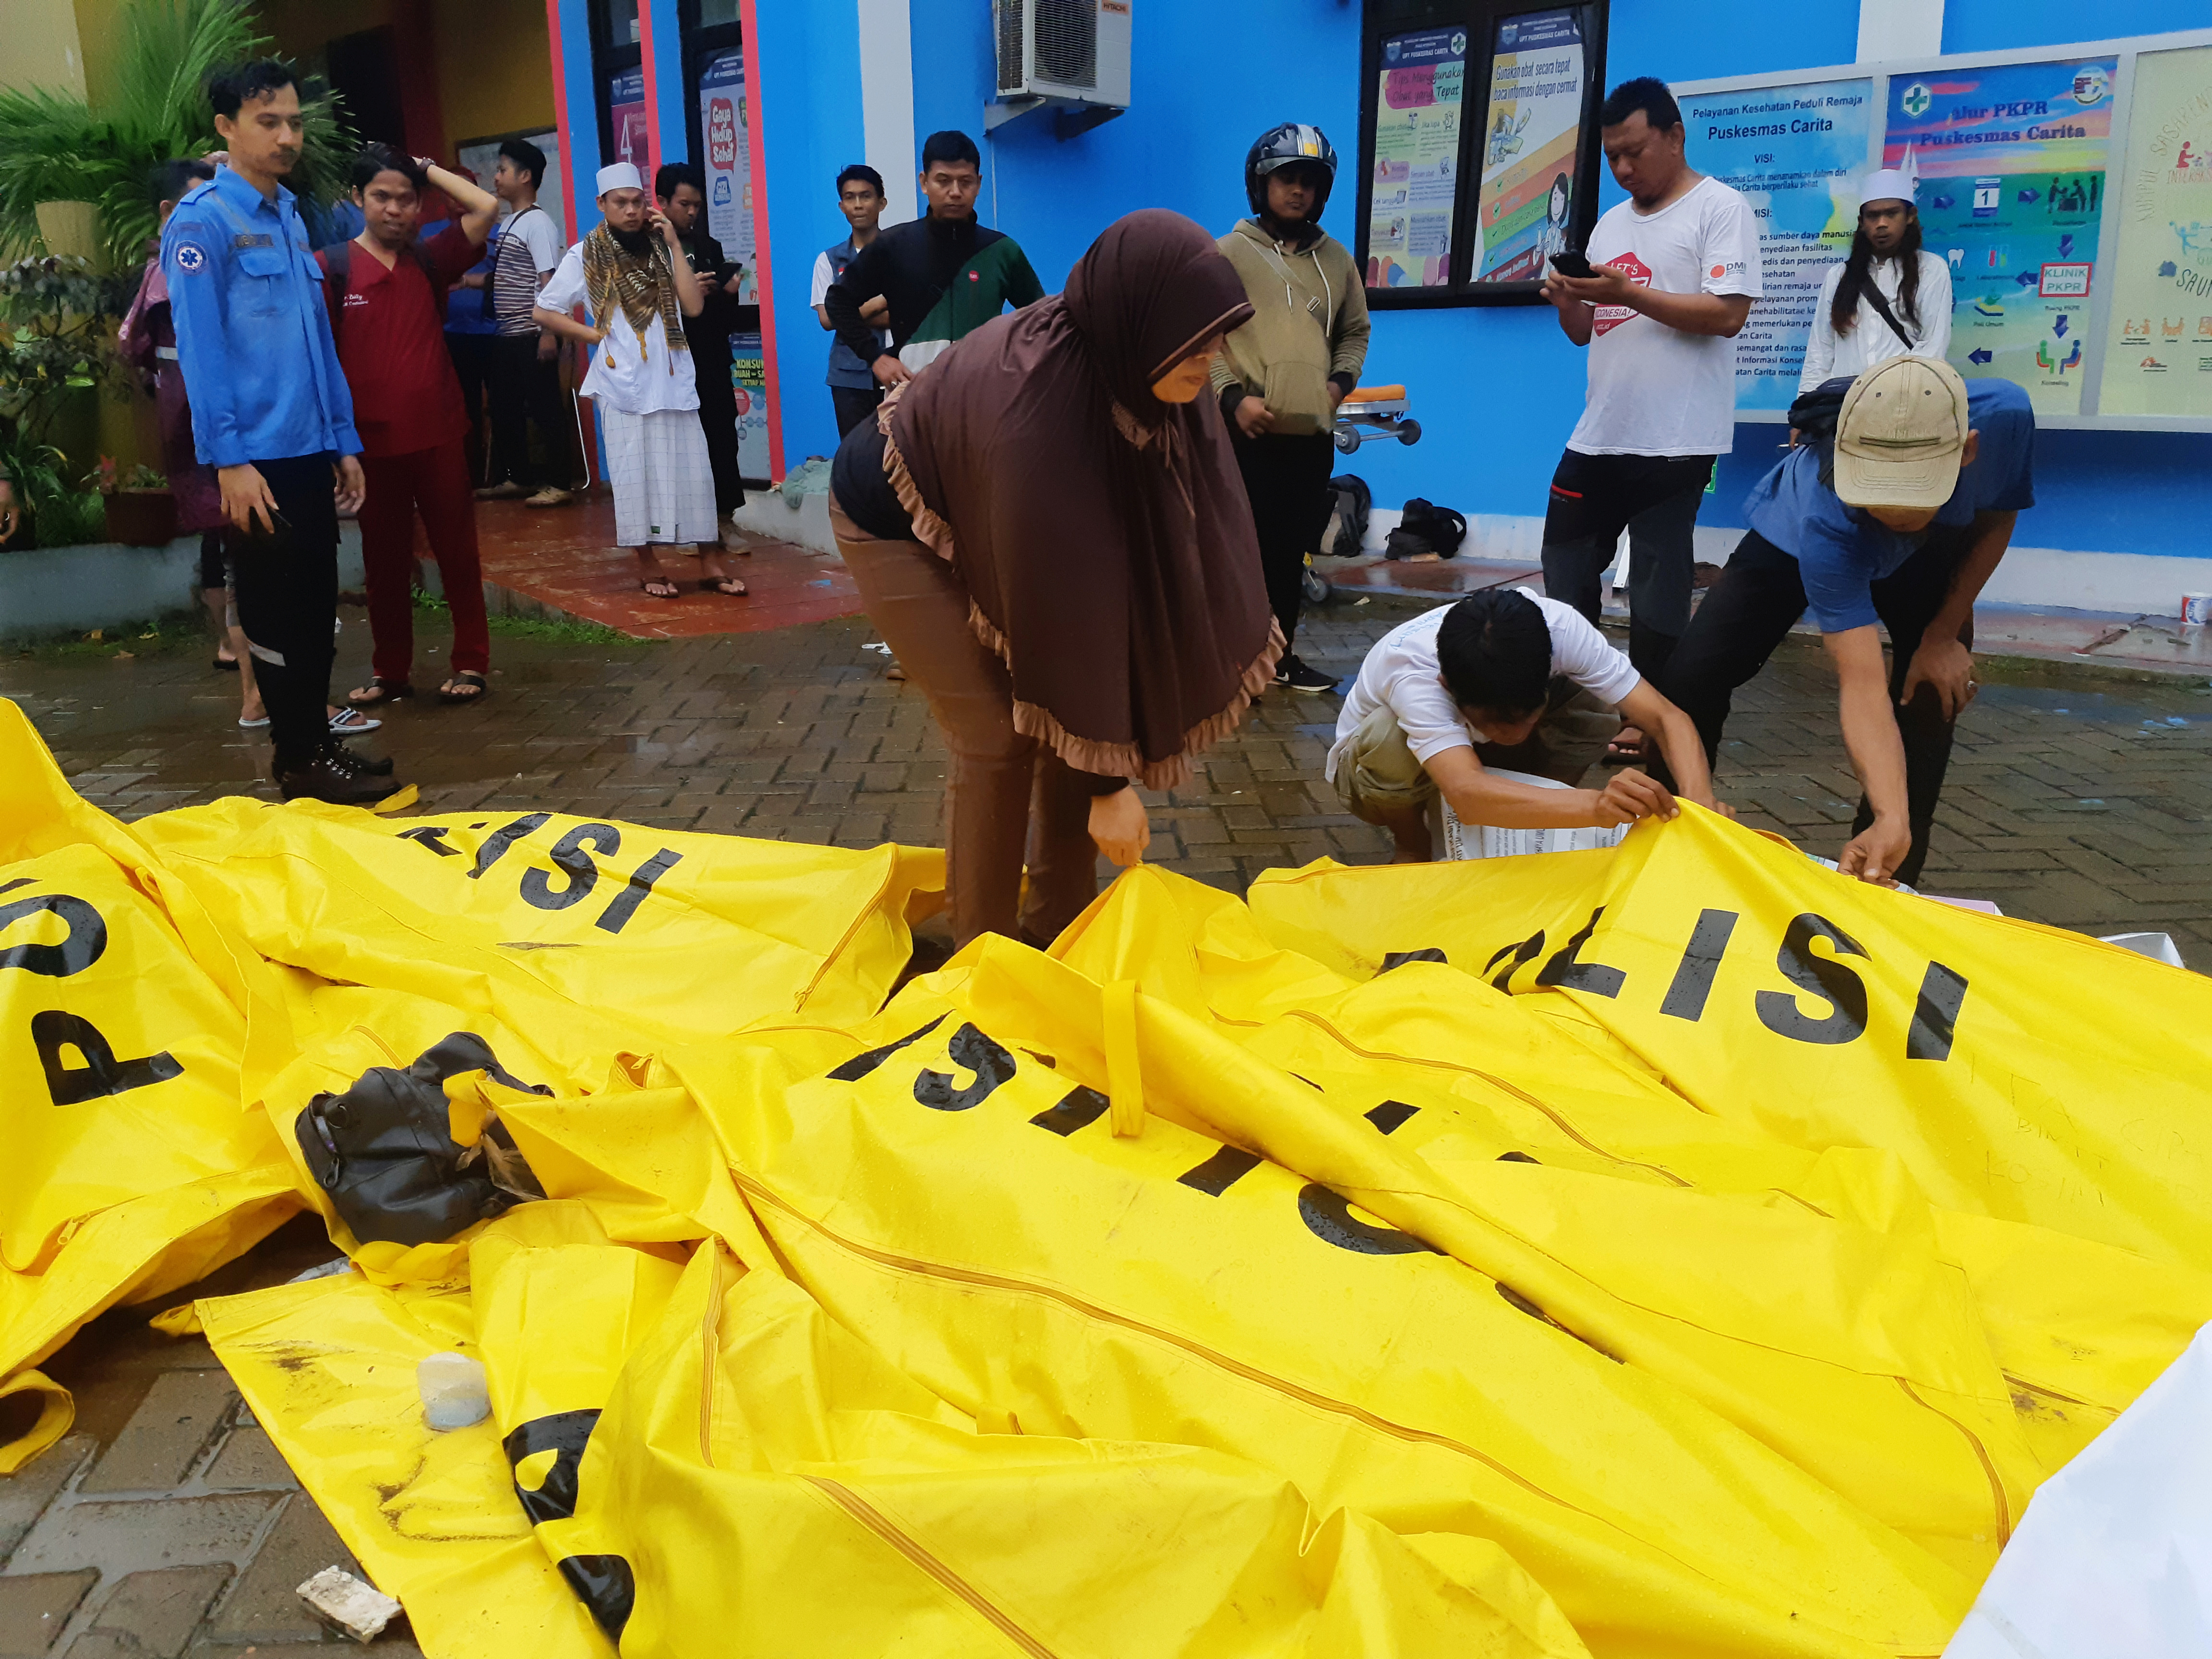 Residents inspect body bags as they search for family members outside a local health center following a tsunami at Panimbang district in Pandeglang, Banten province, Indonesia, December 23, 2018. REUTERS/Adi Kurniawan